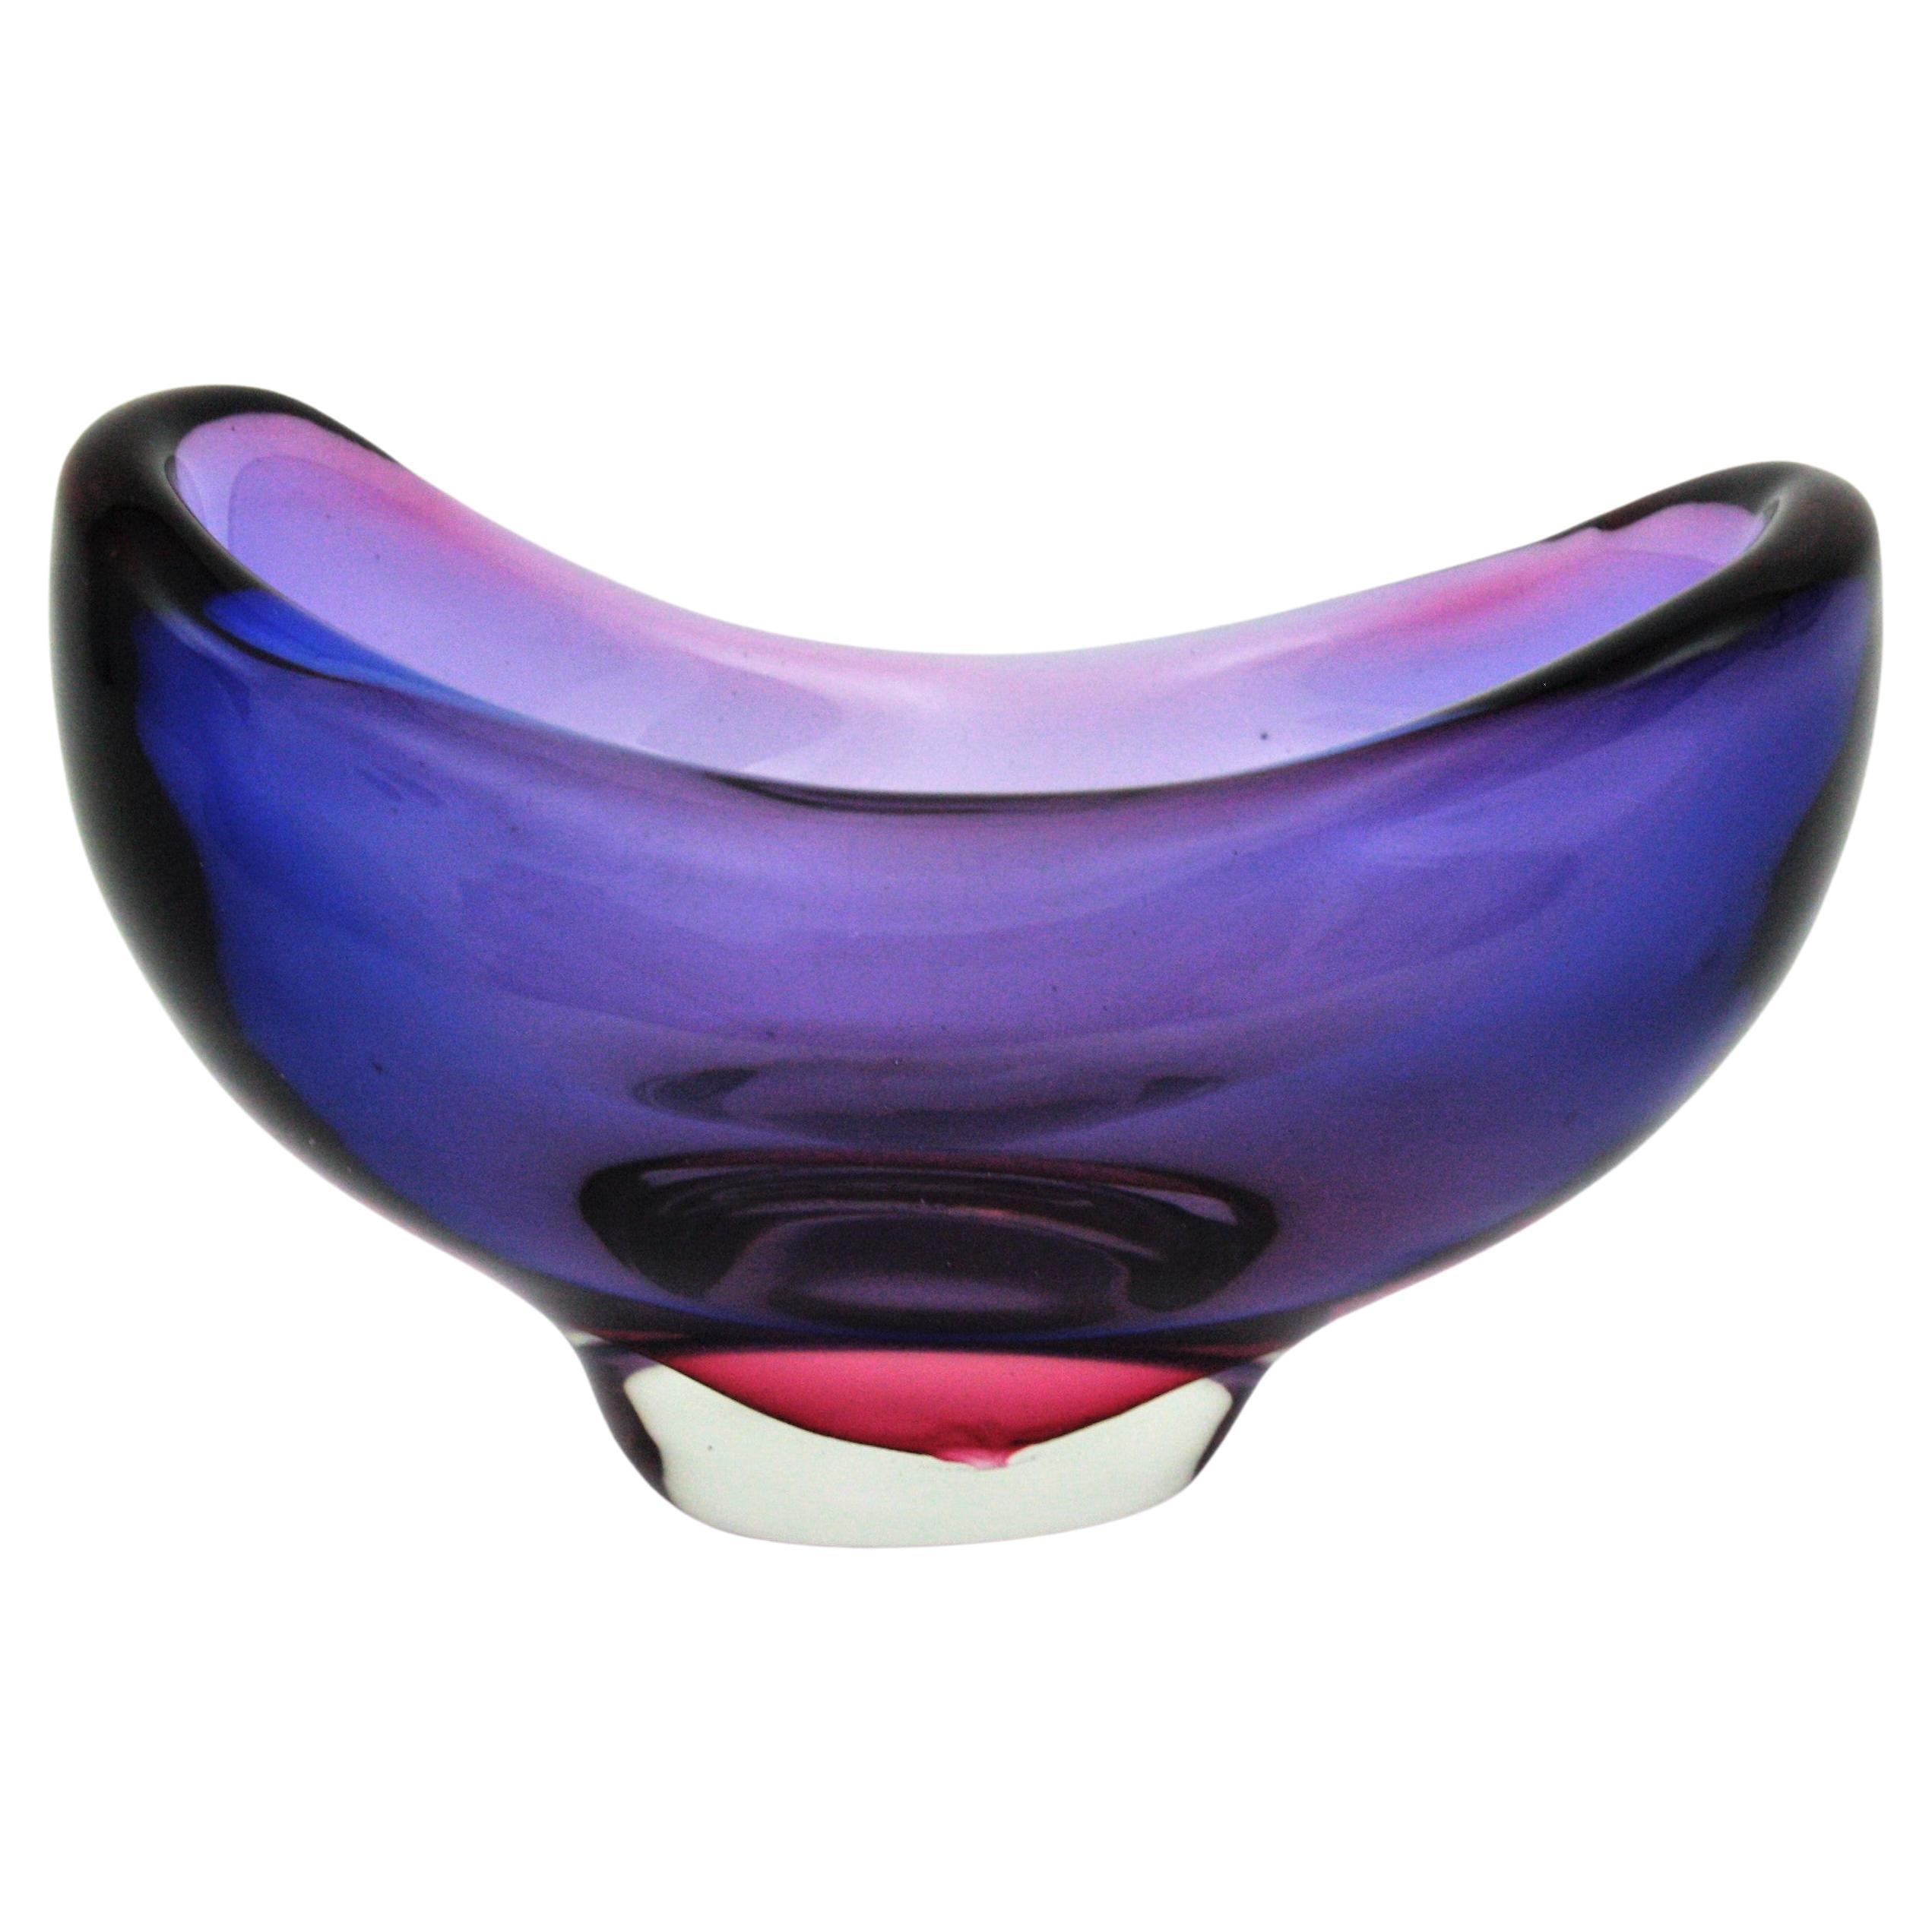 Outstanding hand blown Murano Art glass bowl in shades of purple pink and blue. Italy, 1960s.
Manufactured By Luciano Gaspari for Salviati.
Signed underneath.
This beautiful bowl has purple blue glass cased into clear glass with Sommerso technique.